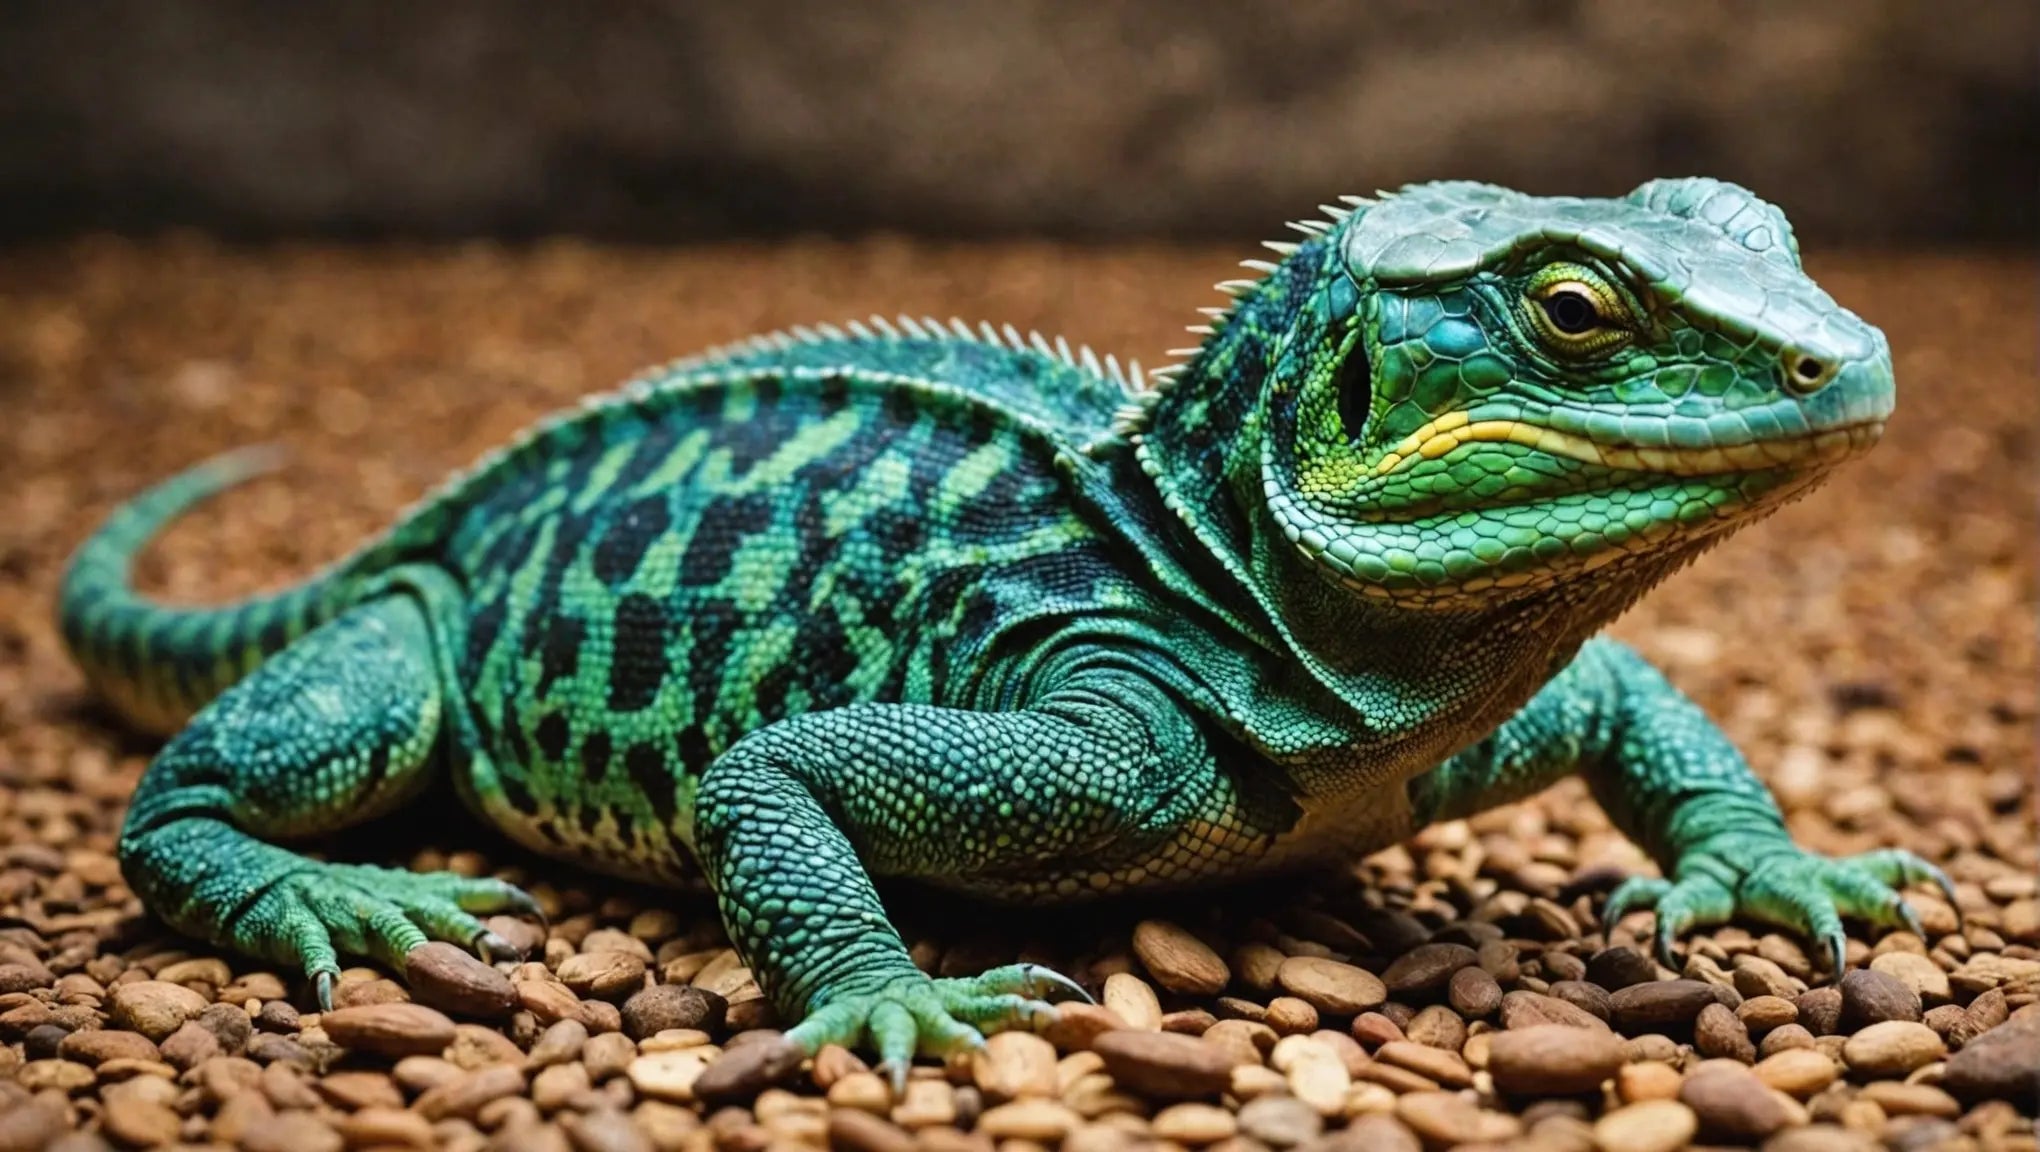 10 Reptile Food Options for Your Pet's Health